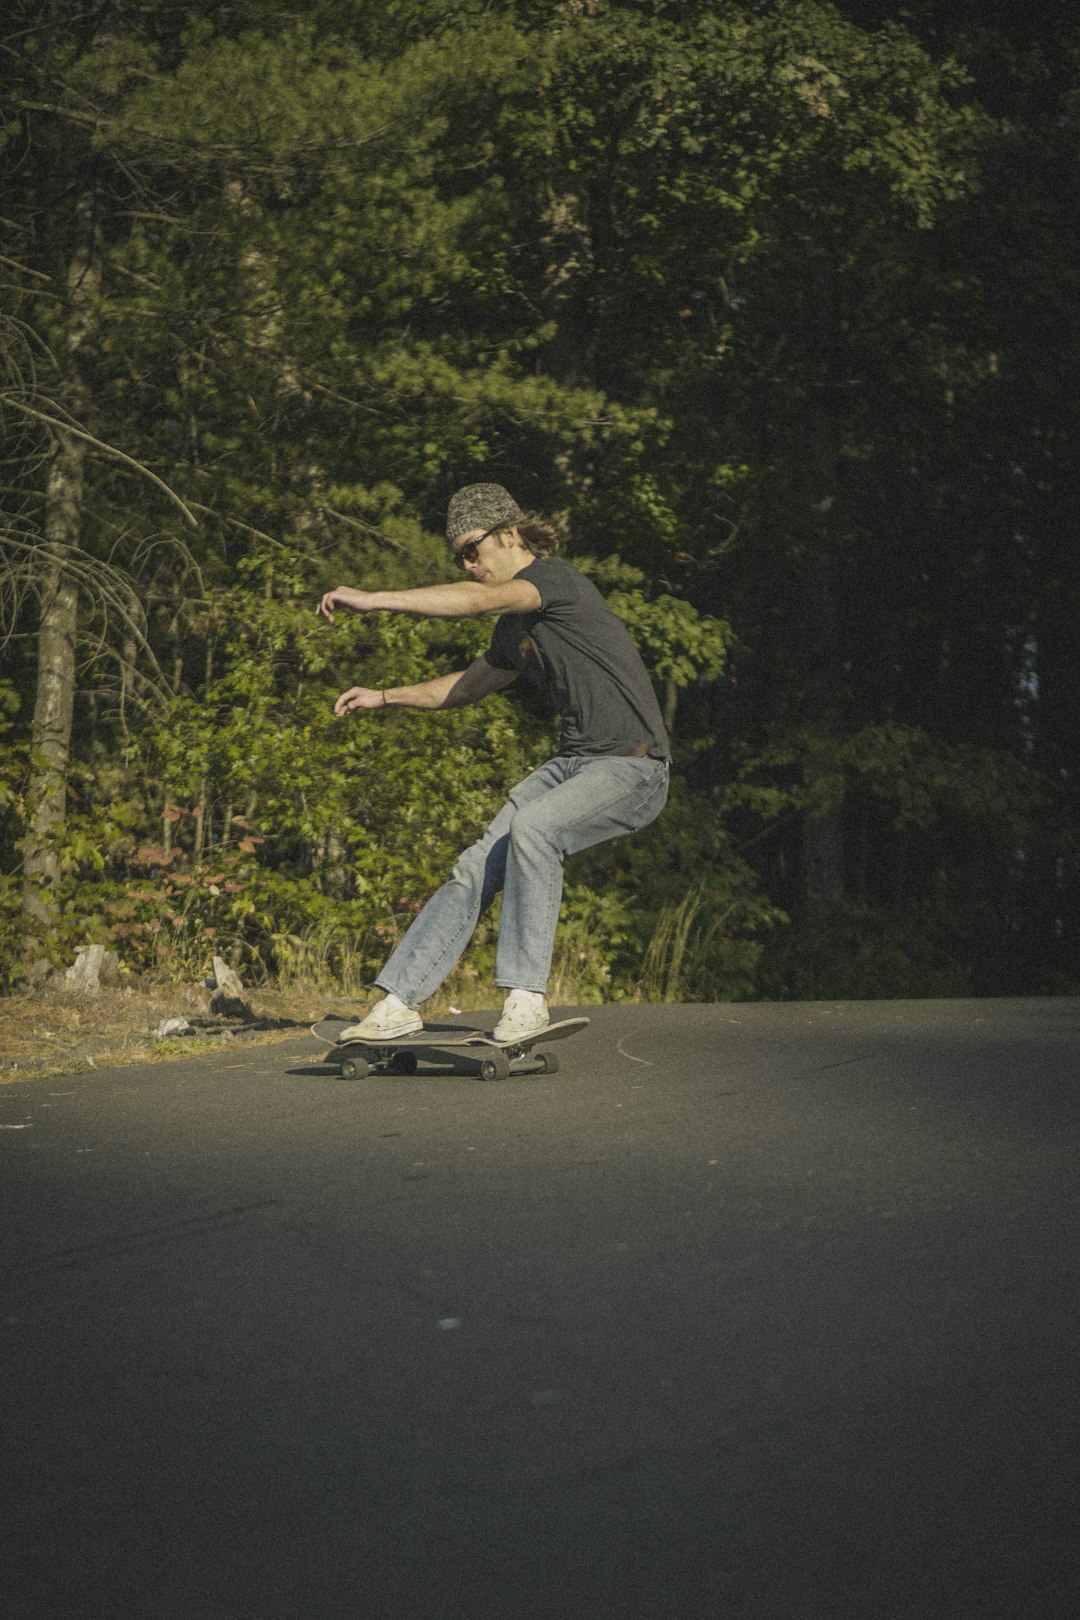 man in black t-shirt and blue denim jeans riding skateboard on road during daytime